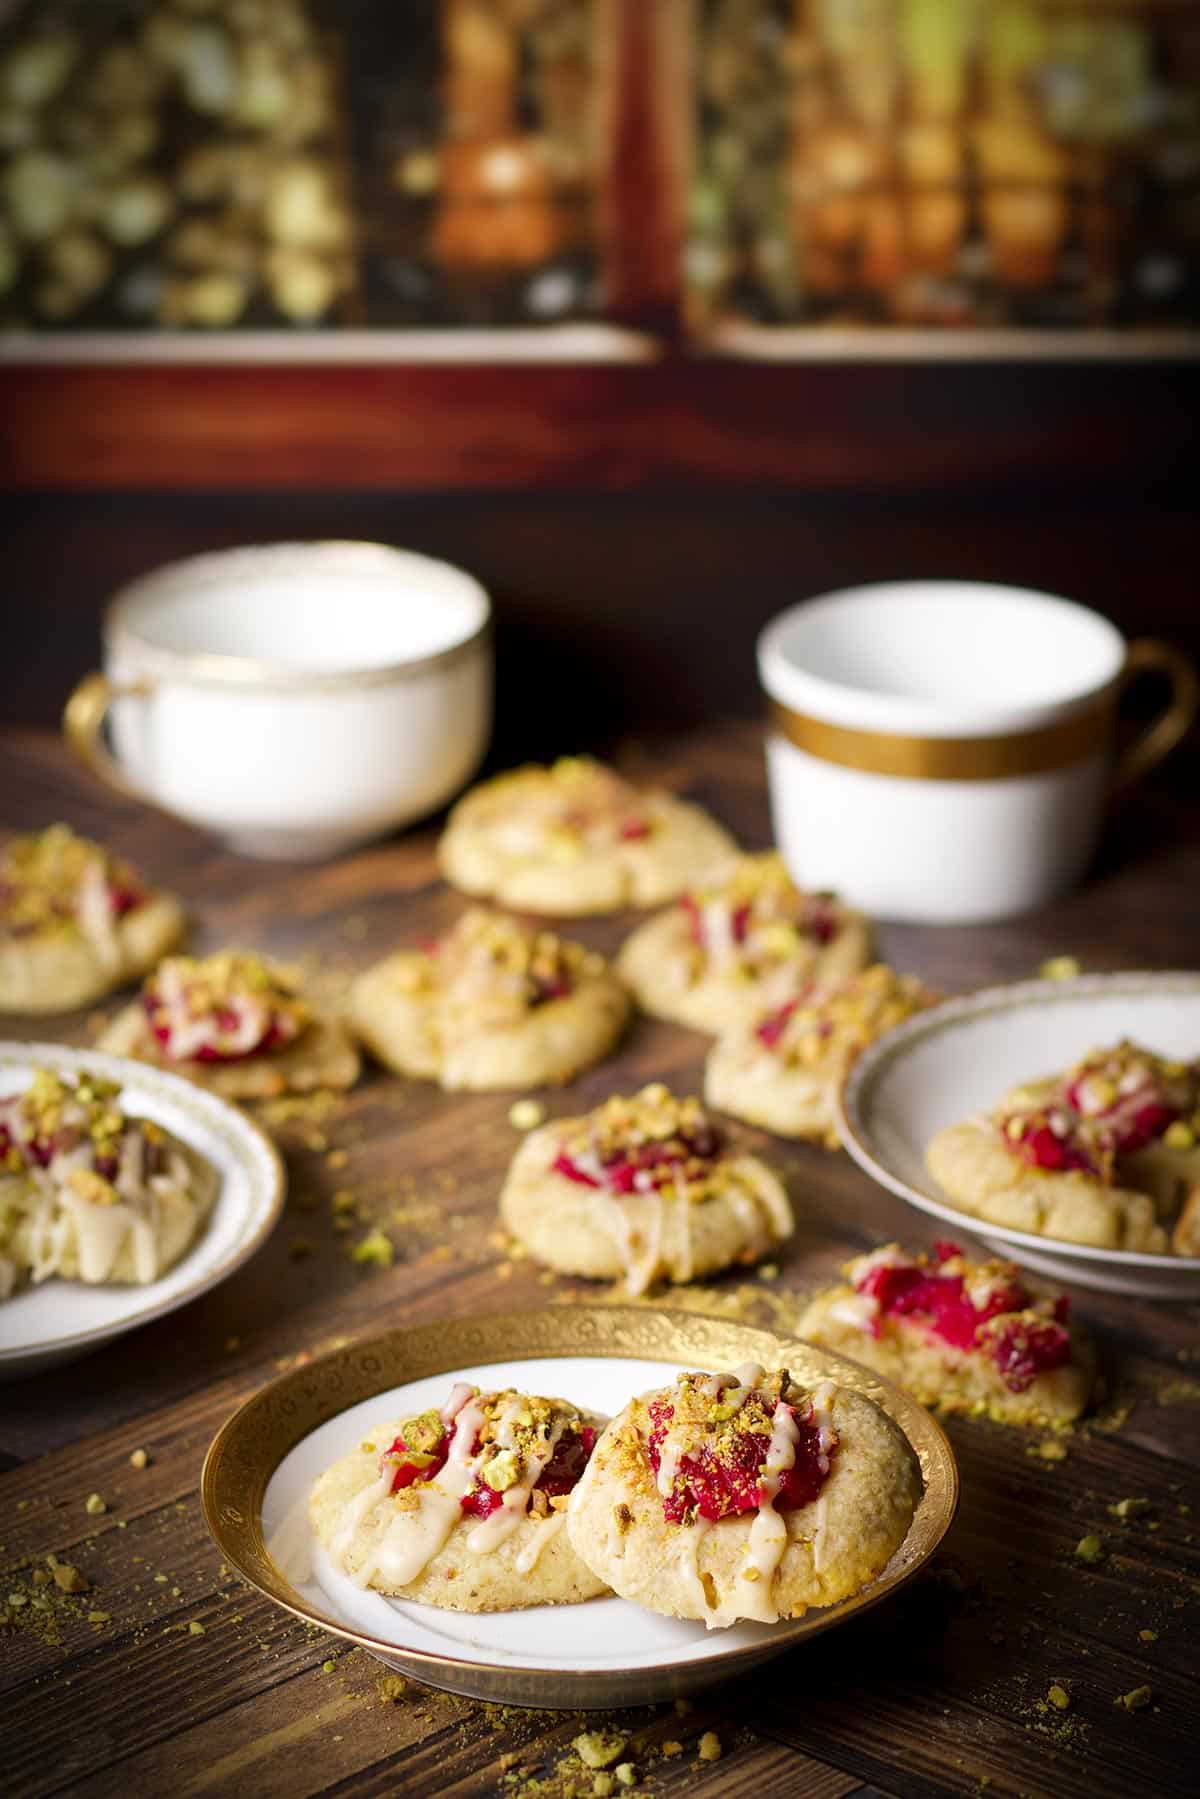 Several cranberry pistachio cookies scattered around a wooden table, some on plates and some just lying on the table.